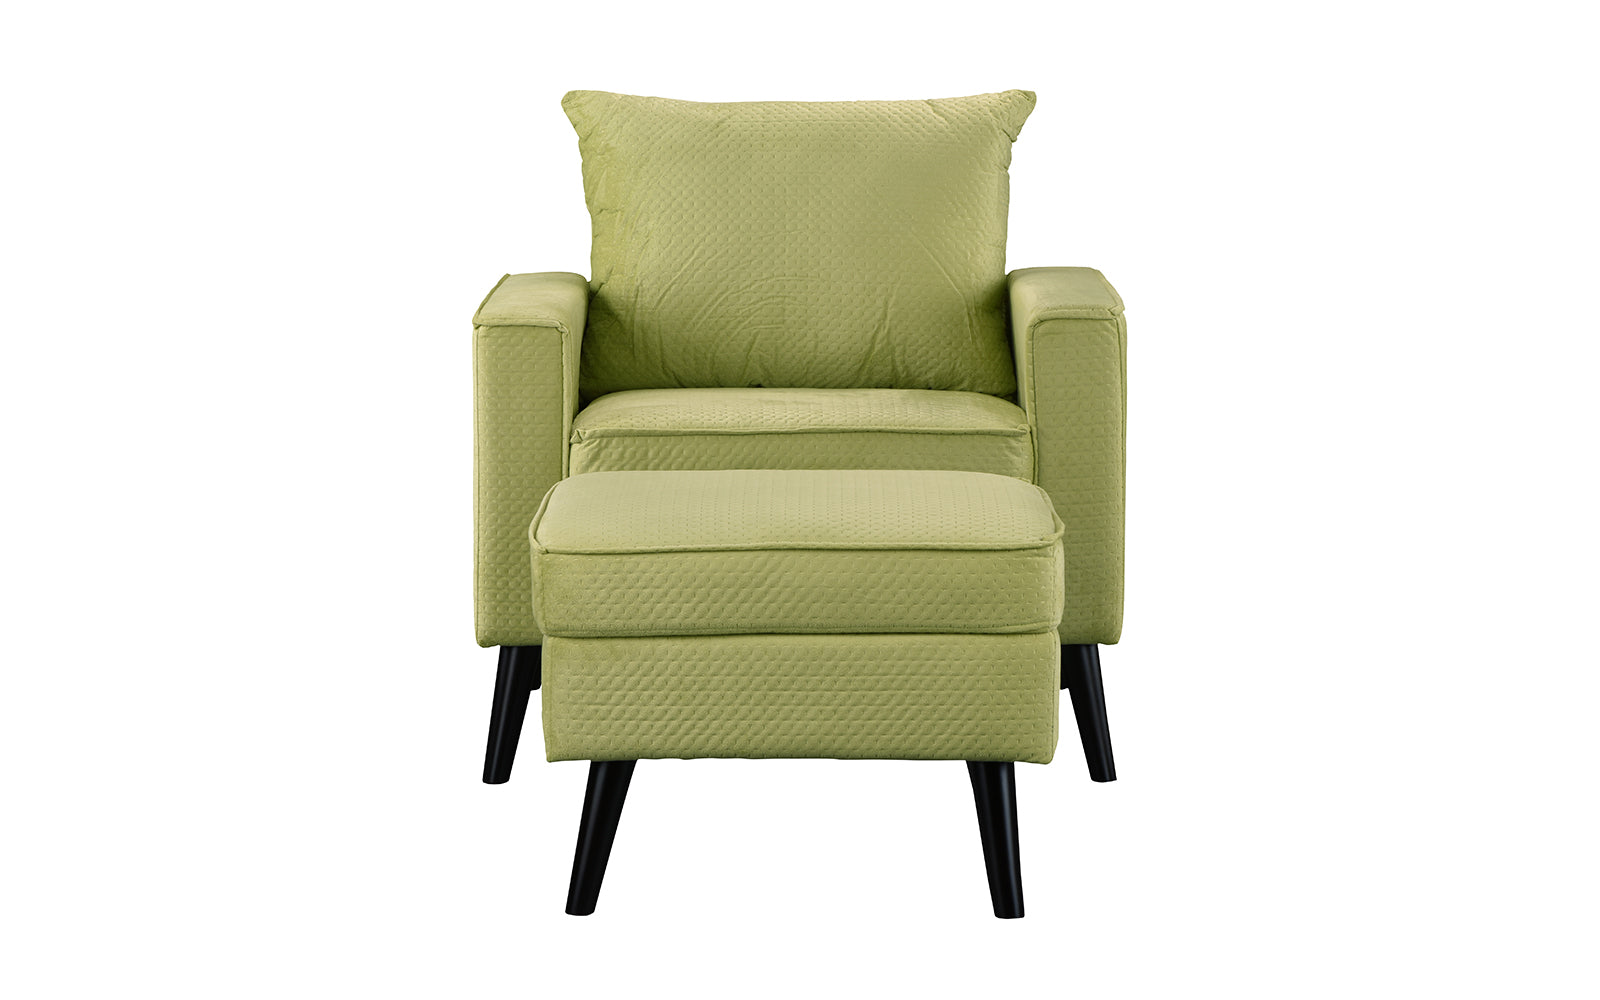 EXP172-VV-GRN Alexa Classic Microfiber Accent Chair and Storage  sku EXP172-VV-GRN